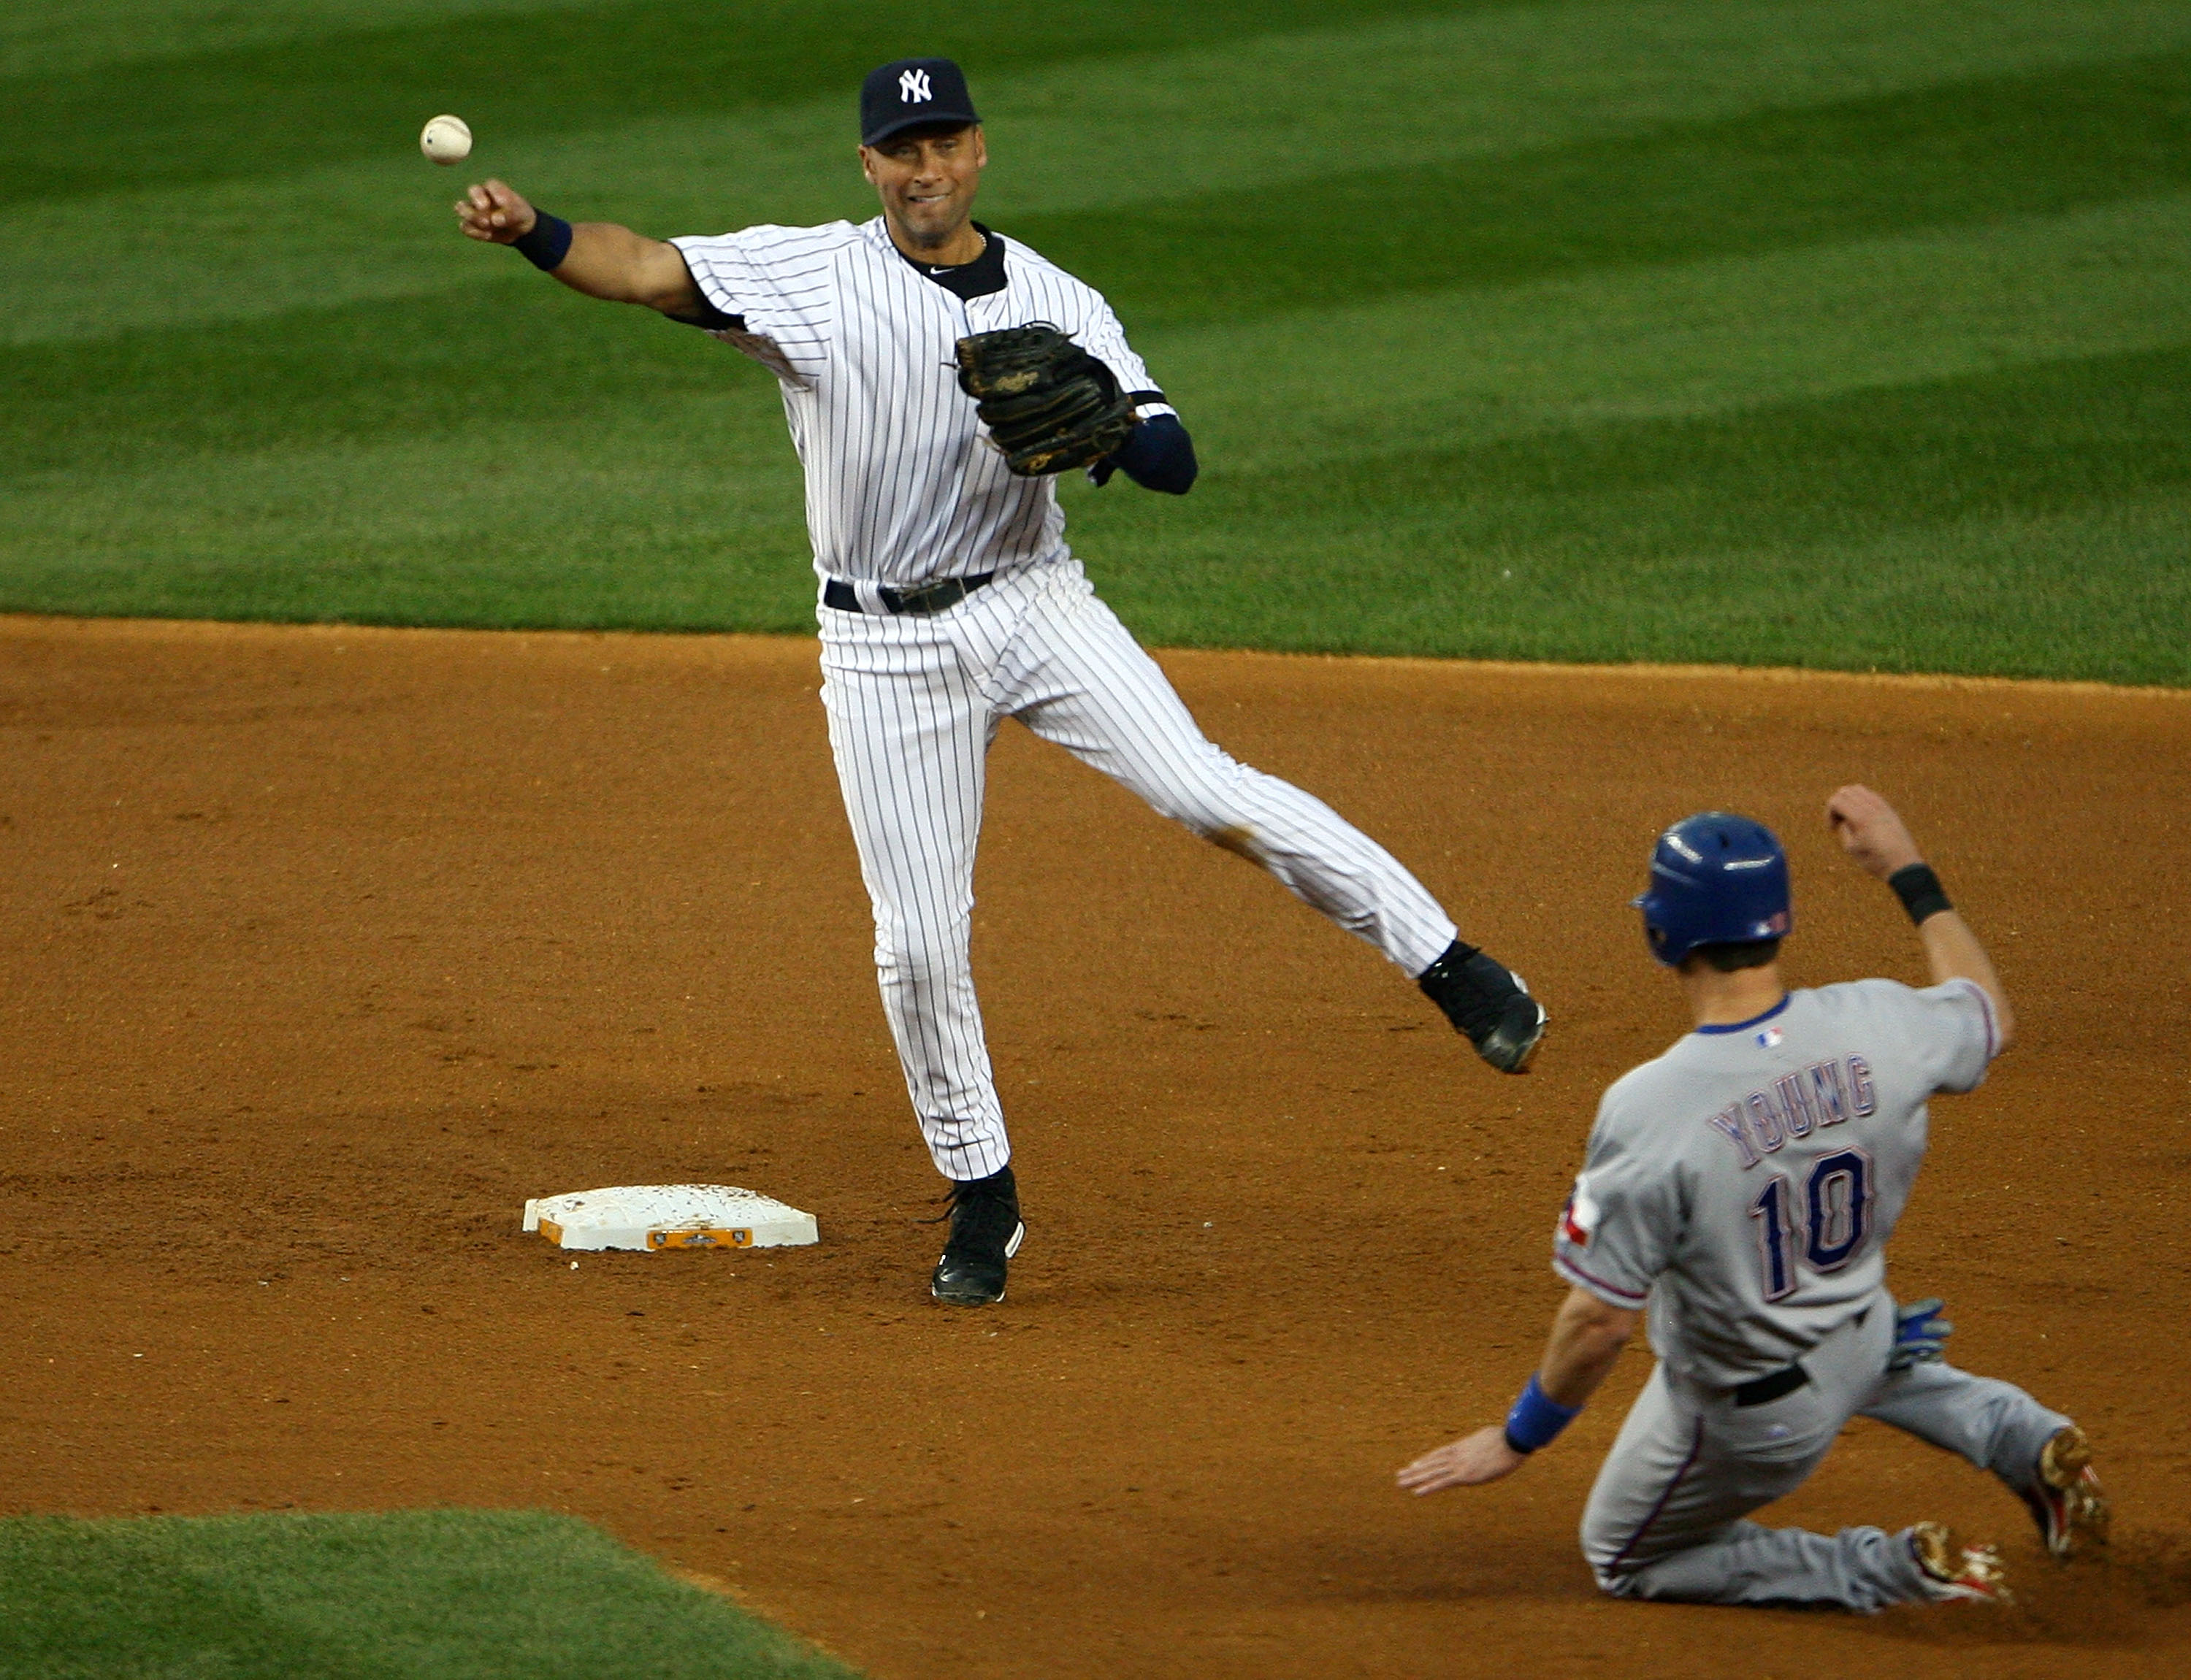 NEW YORK - OCTOBER 20:  Derek Jeter #2 of the New York Yankees turns a successful double play over a sliding Michael Young #10 of the Texas Rangers on a ball hit by Josh Hamilton #32 in the top of the fifth inning of Game Five of the ALCS during the 2010